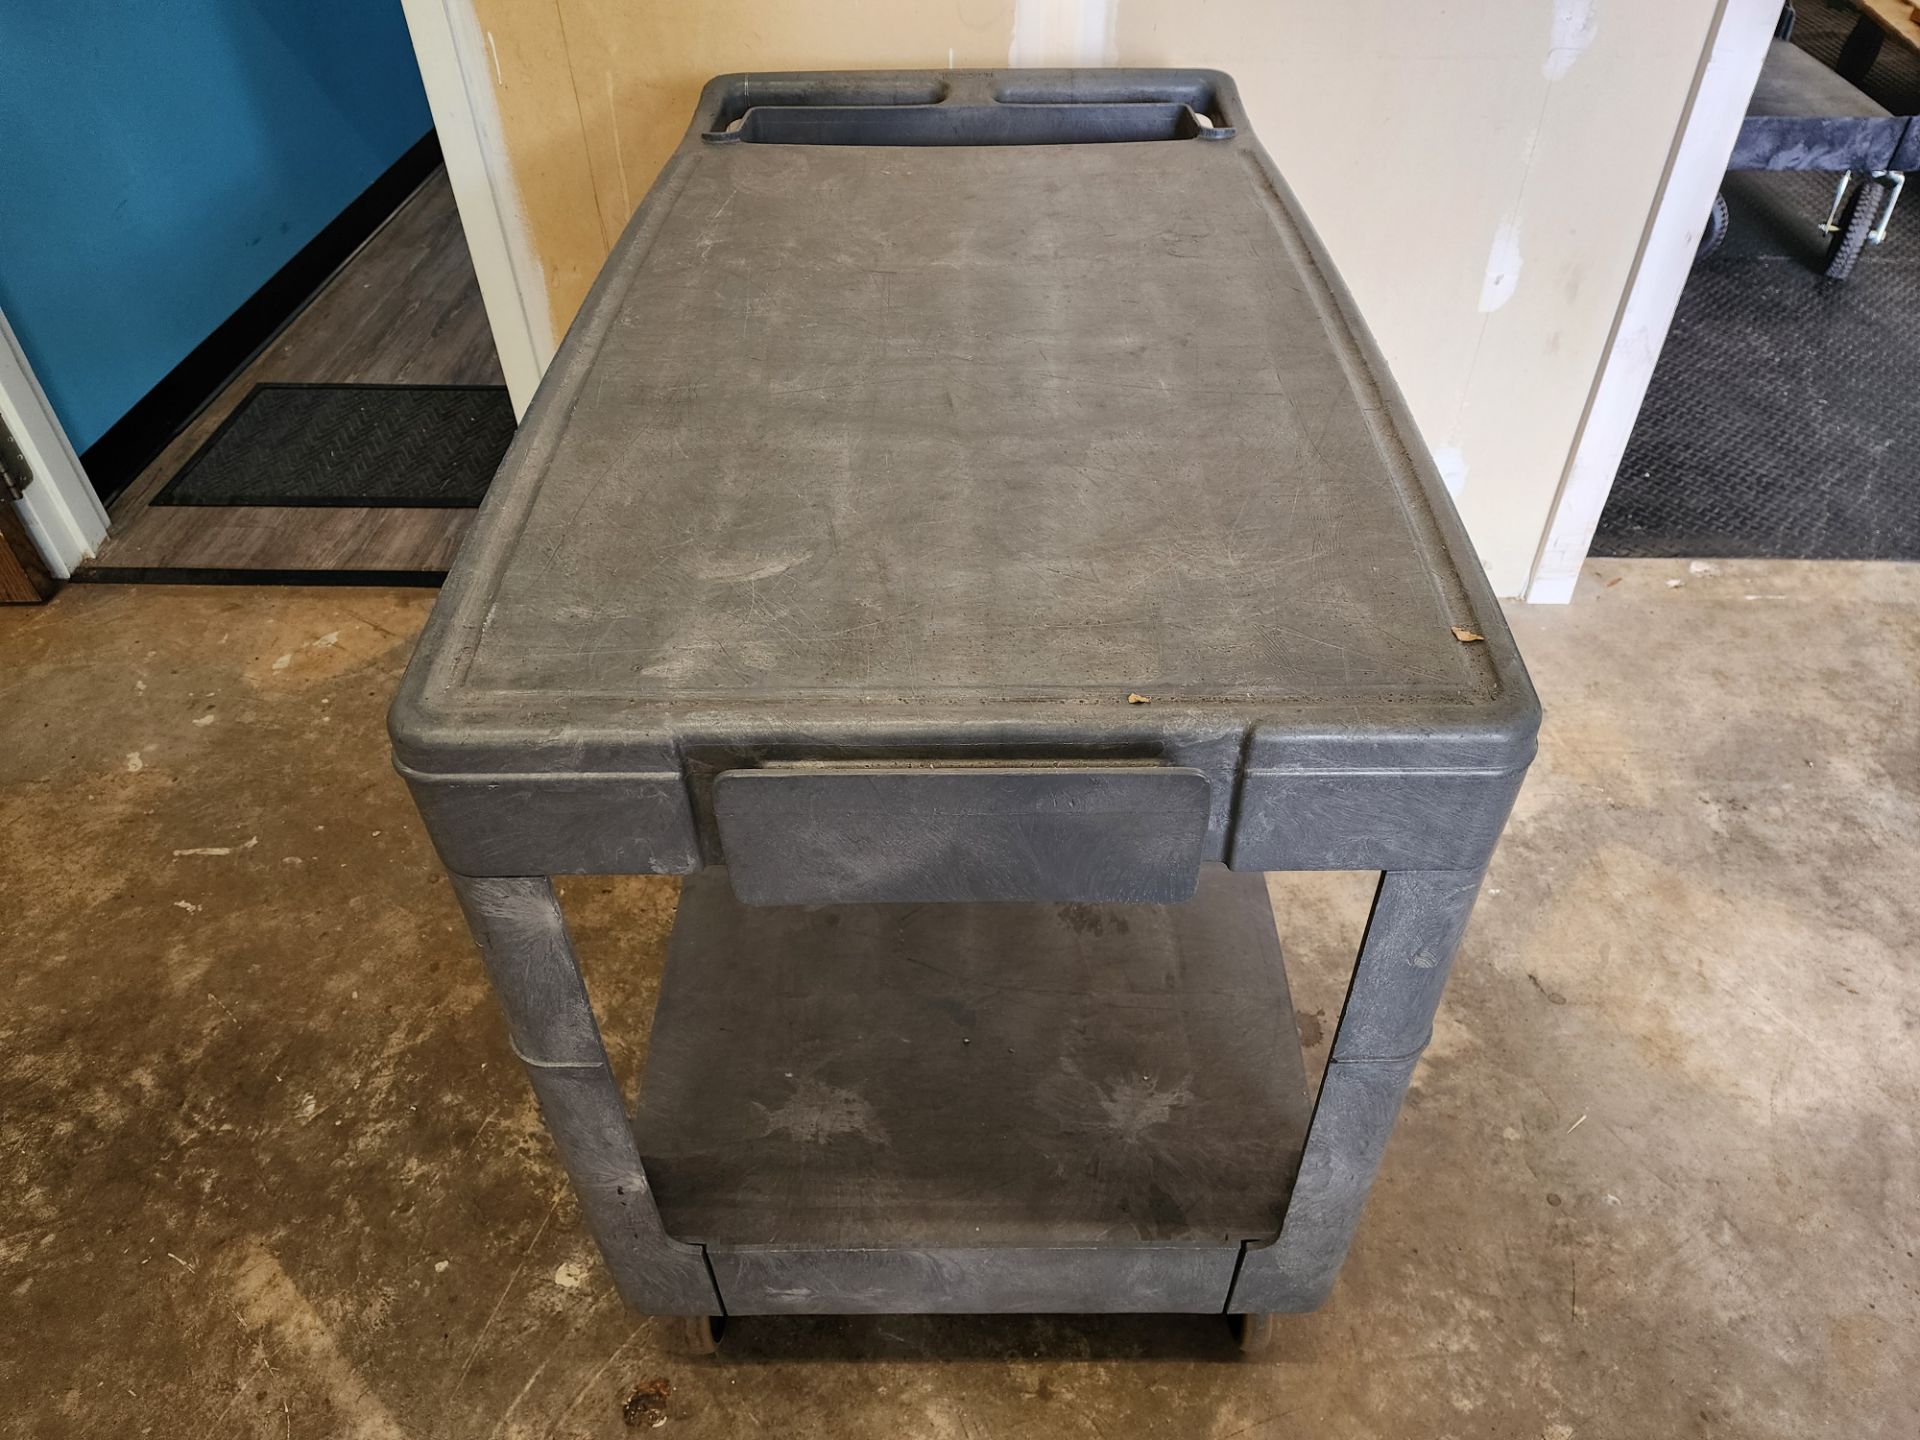 Gray Rubbermaid Utility Cart, 2-Tier, 25"x36" - Image 3 of 3